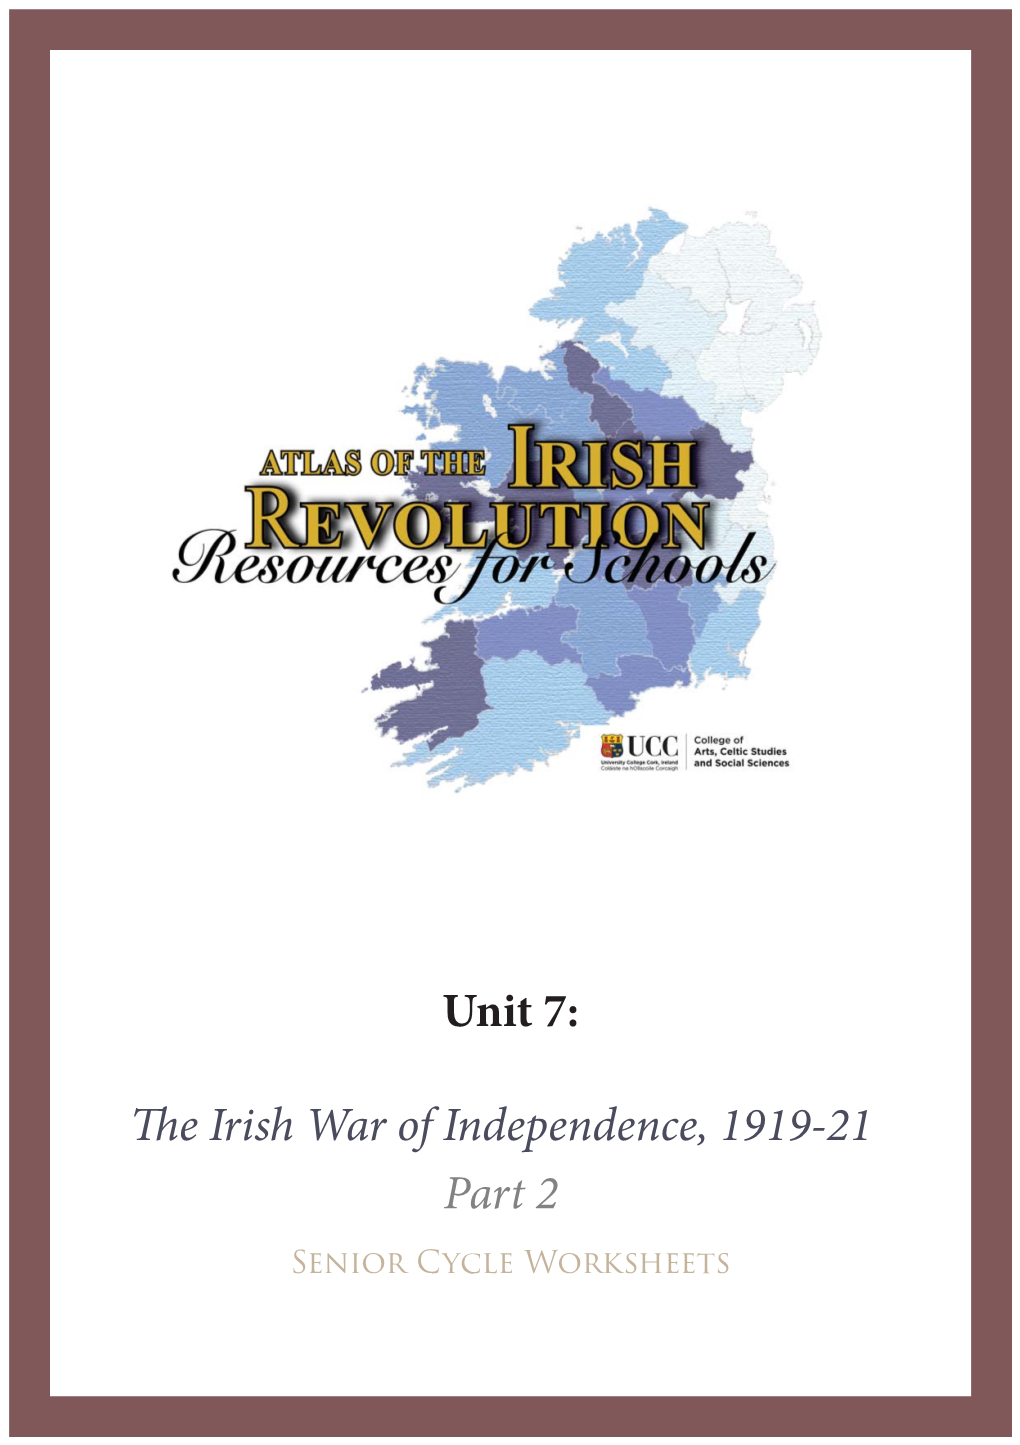 The Irish War of Independence, 1919-21 Part 2 Senior Cycle Worksheets Contents